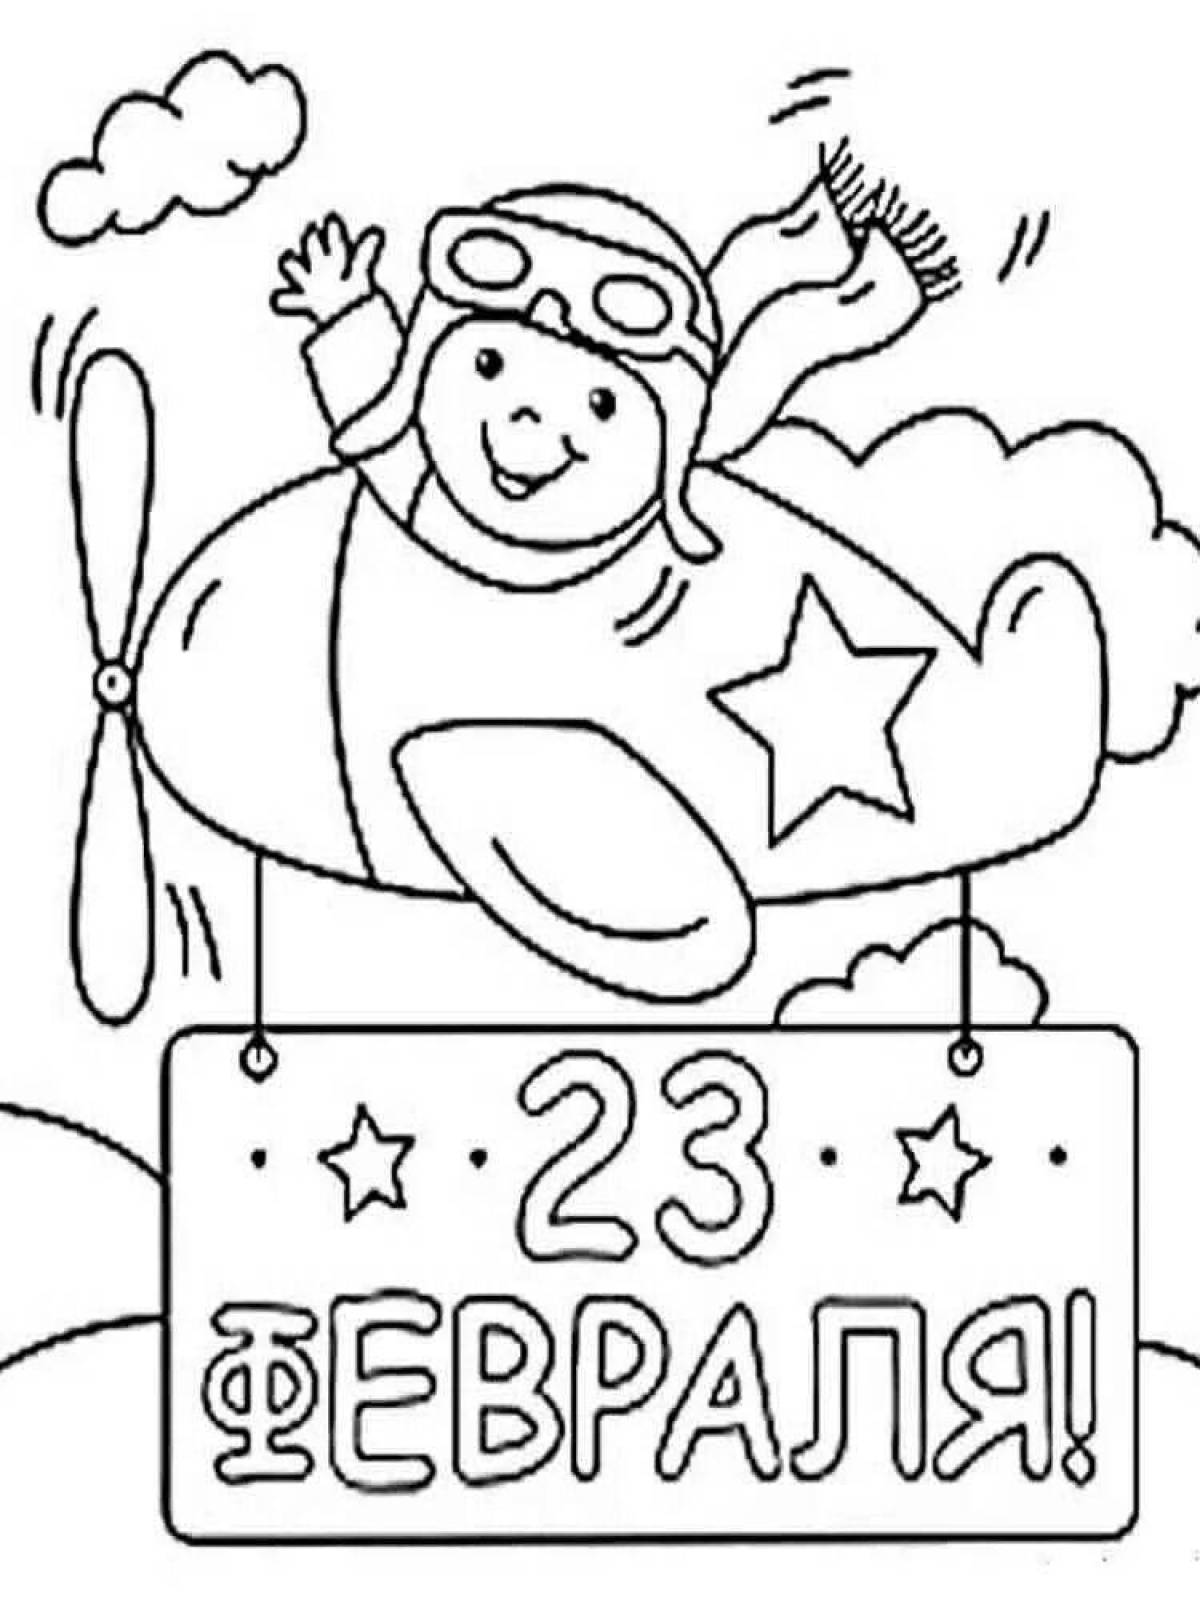 February 23 magic coloring book for kids 3-4 years old